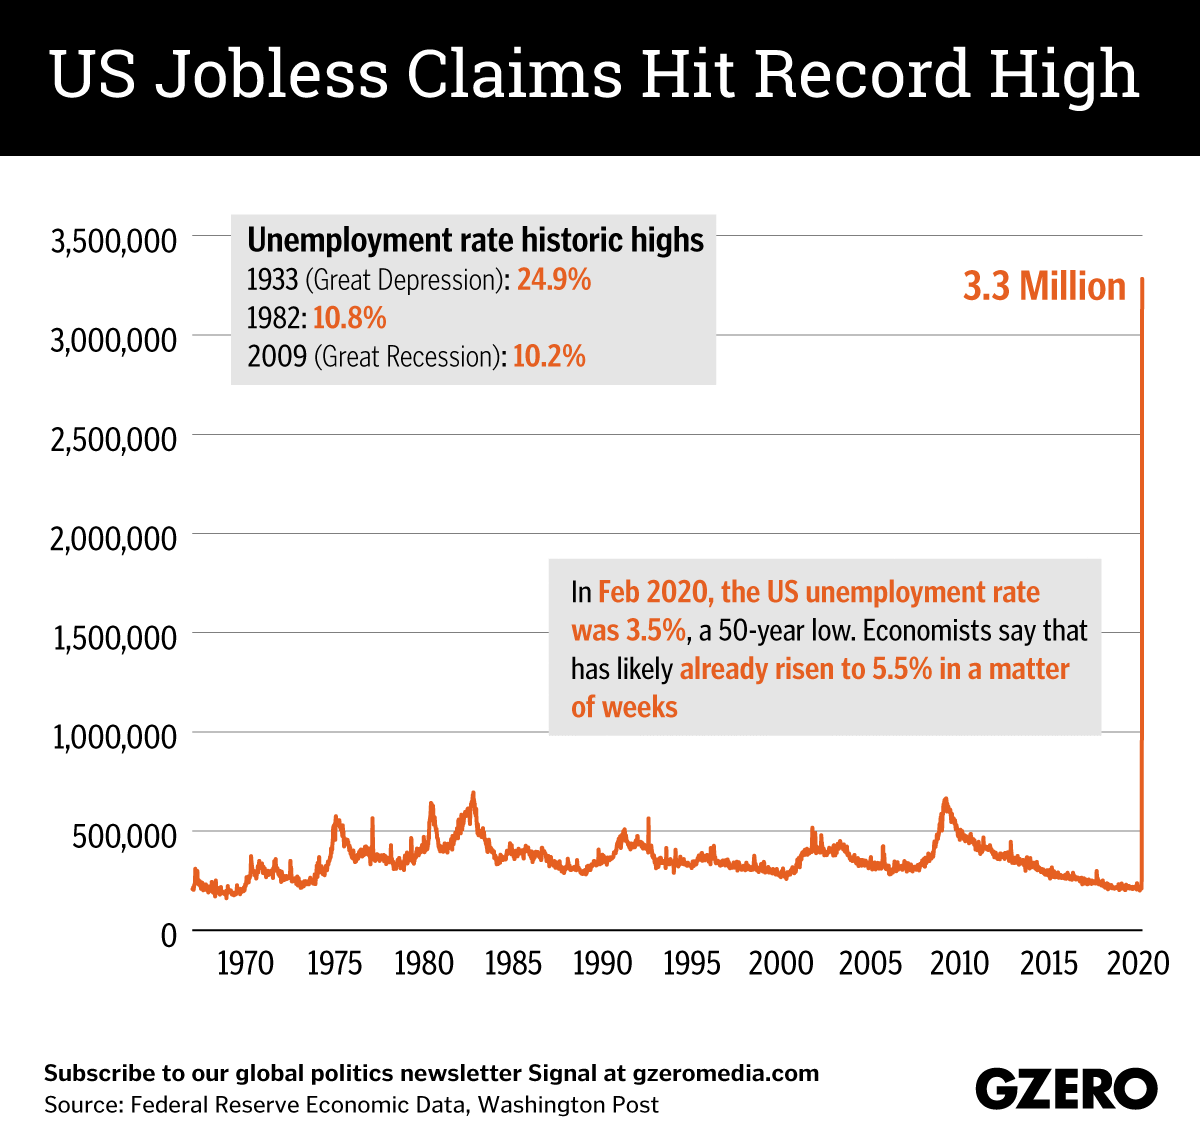 The Graphic Truth: US jobless claims hit record high